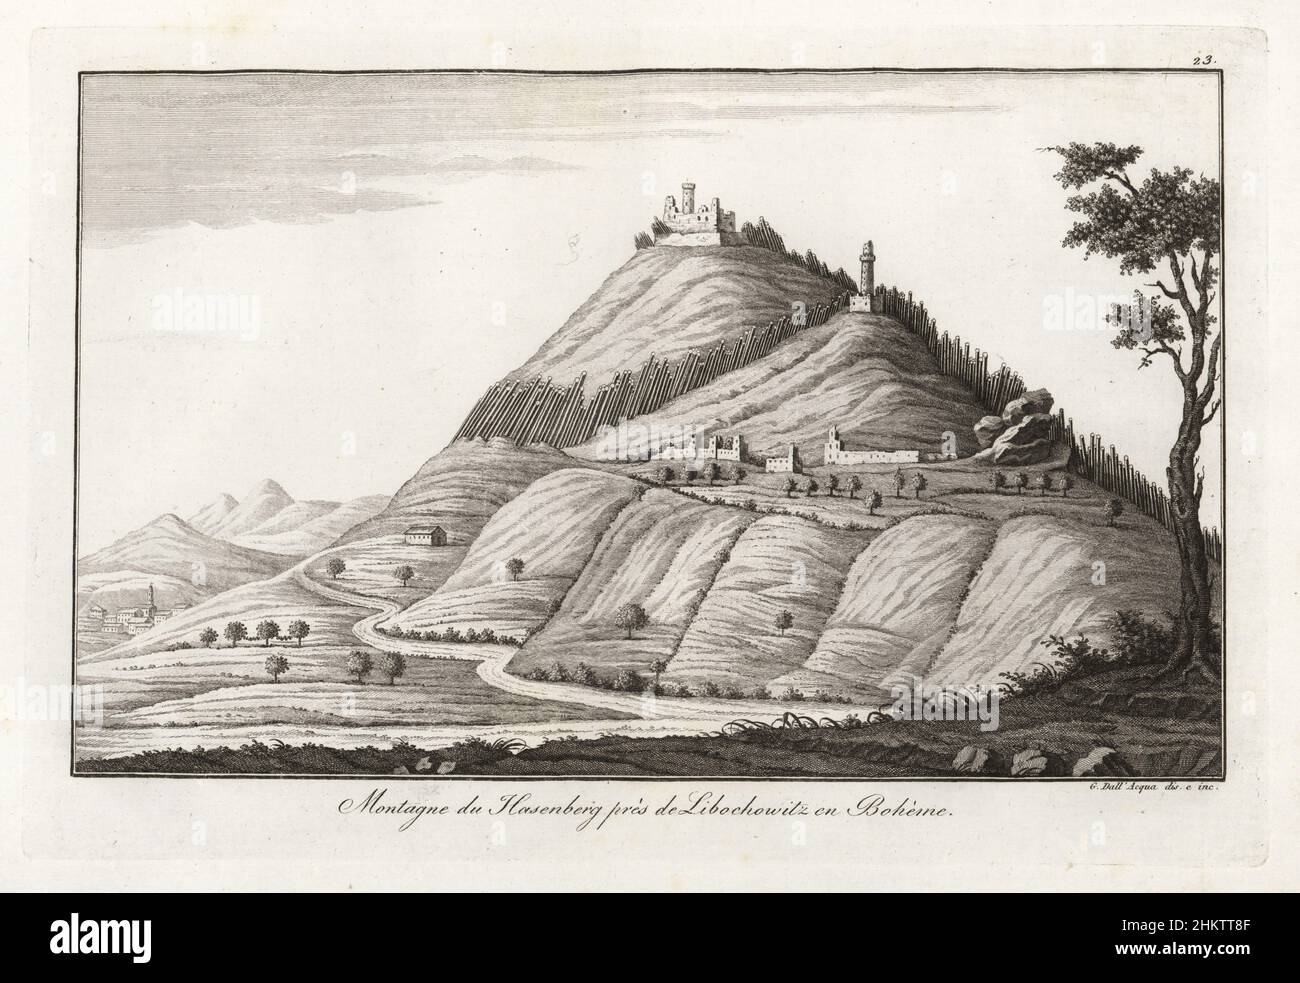 Hasenberg mountain with its basalt prisms, near Libochowitz, Bohemia (Czech Republic). Klopay castle on the summit is built of basalt. After a drawing by Czech geologist Franz Ambrosius Reuss. Montagne du Hasenberg pres de Libochowitz en Boheme. Copperplate engraving by Giuseppe Dall'Acqua from Scipion Breislak’s Traite sur la Structure Exterieure du Globe, Treatise on the Exterior Structure of the Globe, Jean-Pierre Giegler, Milan, 1822. Stock Photo